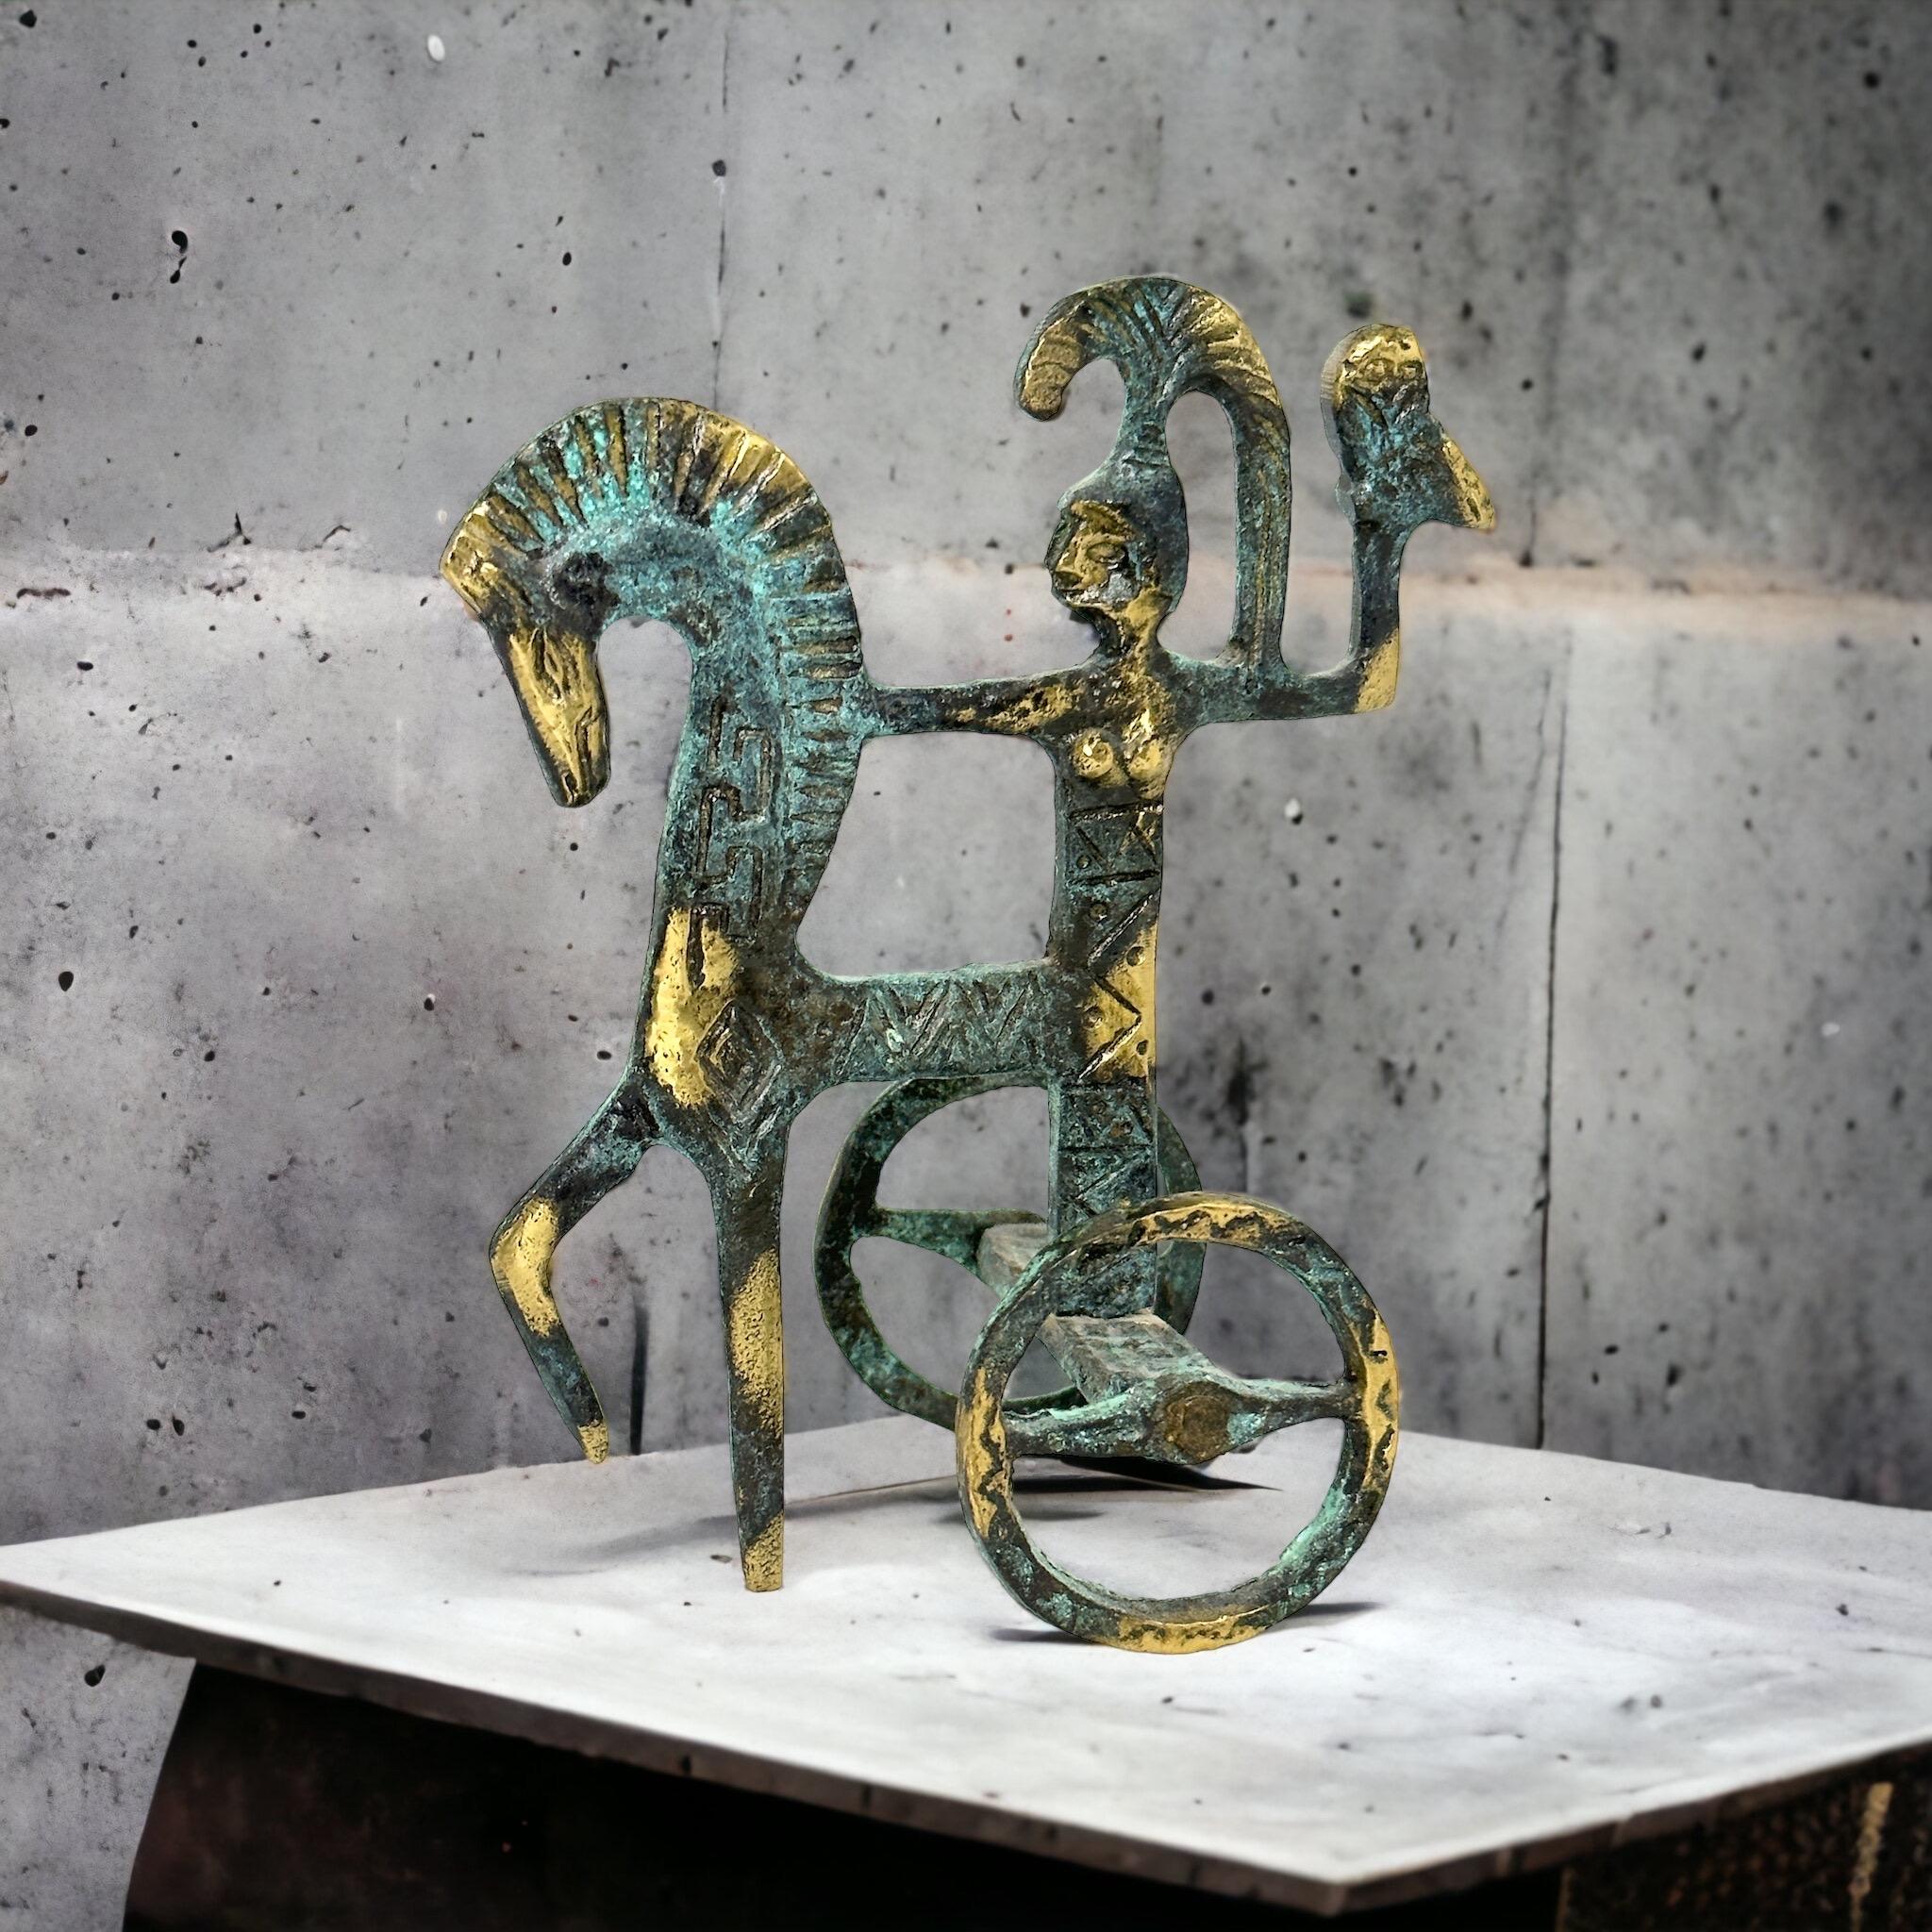 This is a bronze sculpture, in the style of the antique statues and figures of the Etruscans is a gorgeous interior furnishing item. it is an incredibly stylized Etruscan Chariot and has a patina finish. Greece-made and great for any Mid-Century